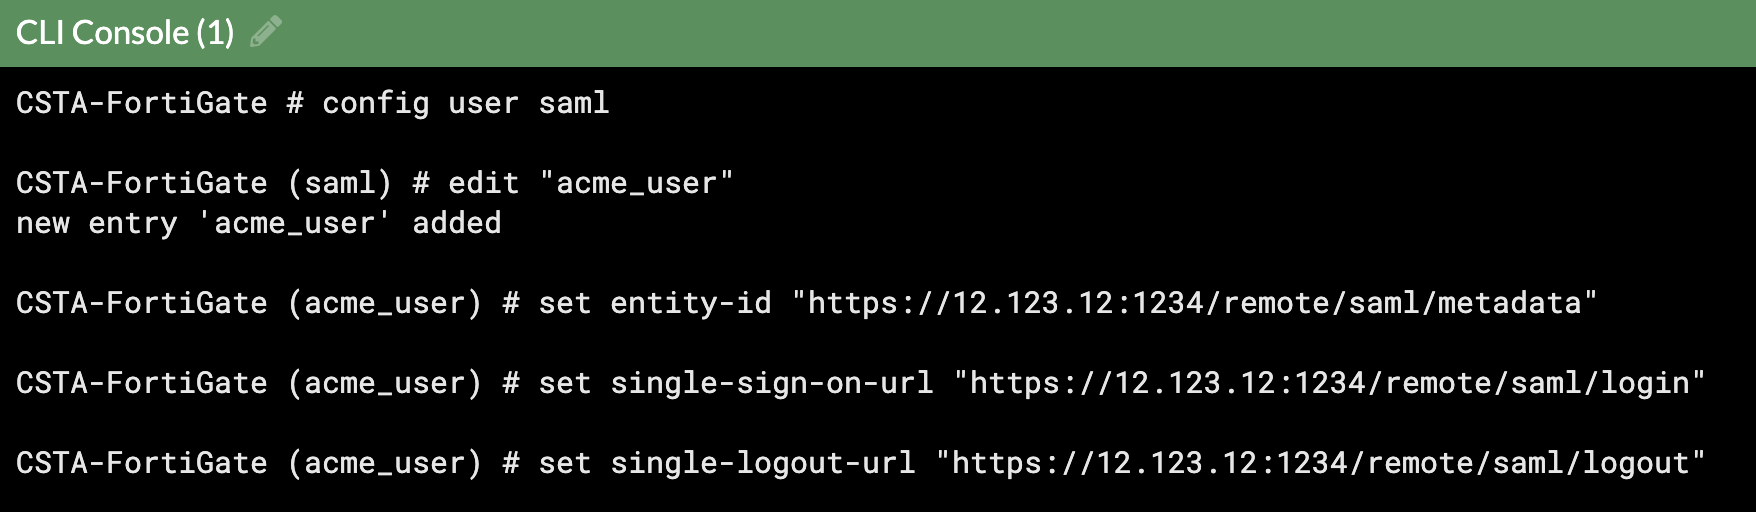 Fortinet FortiGate URLs Added to CLI Console